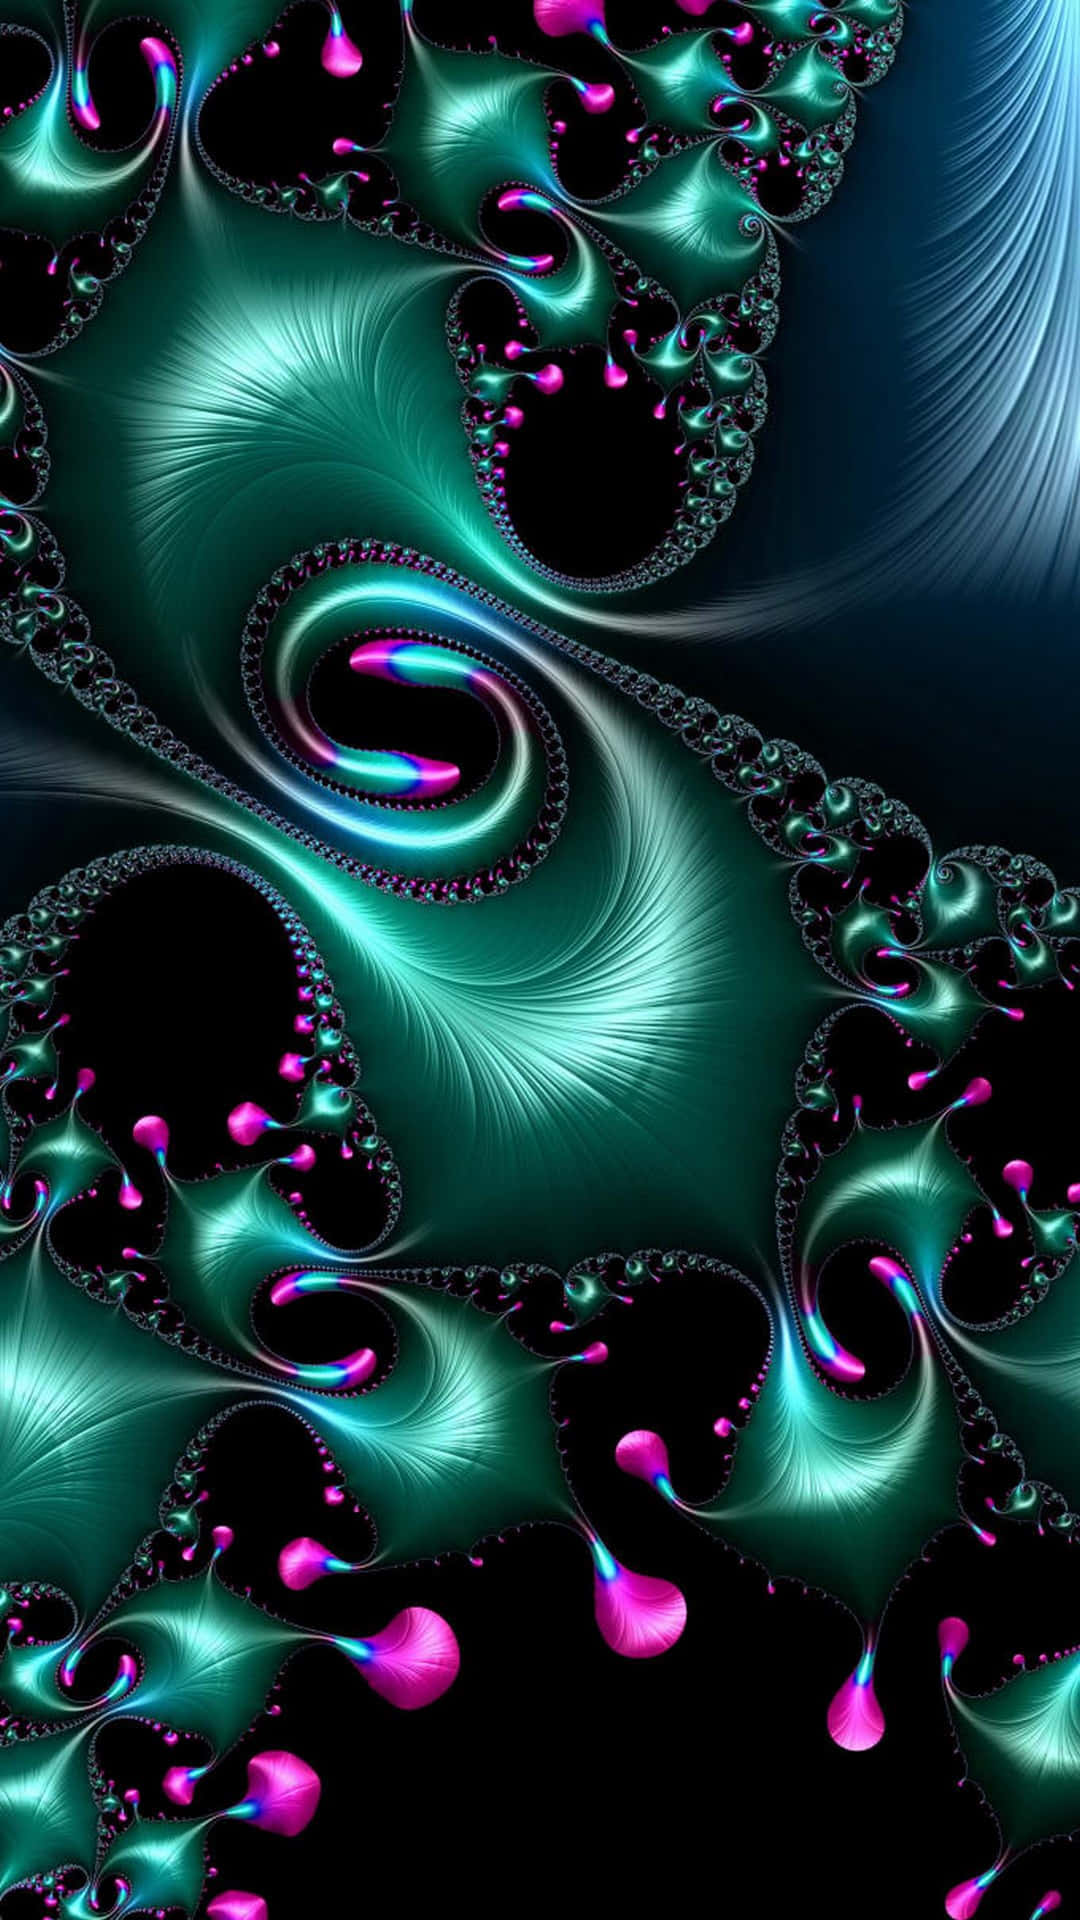 A Blue And Pink Abstract Design With Swirls